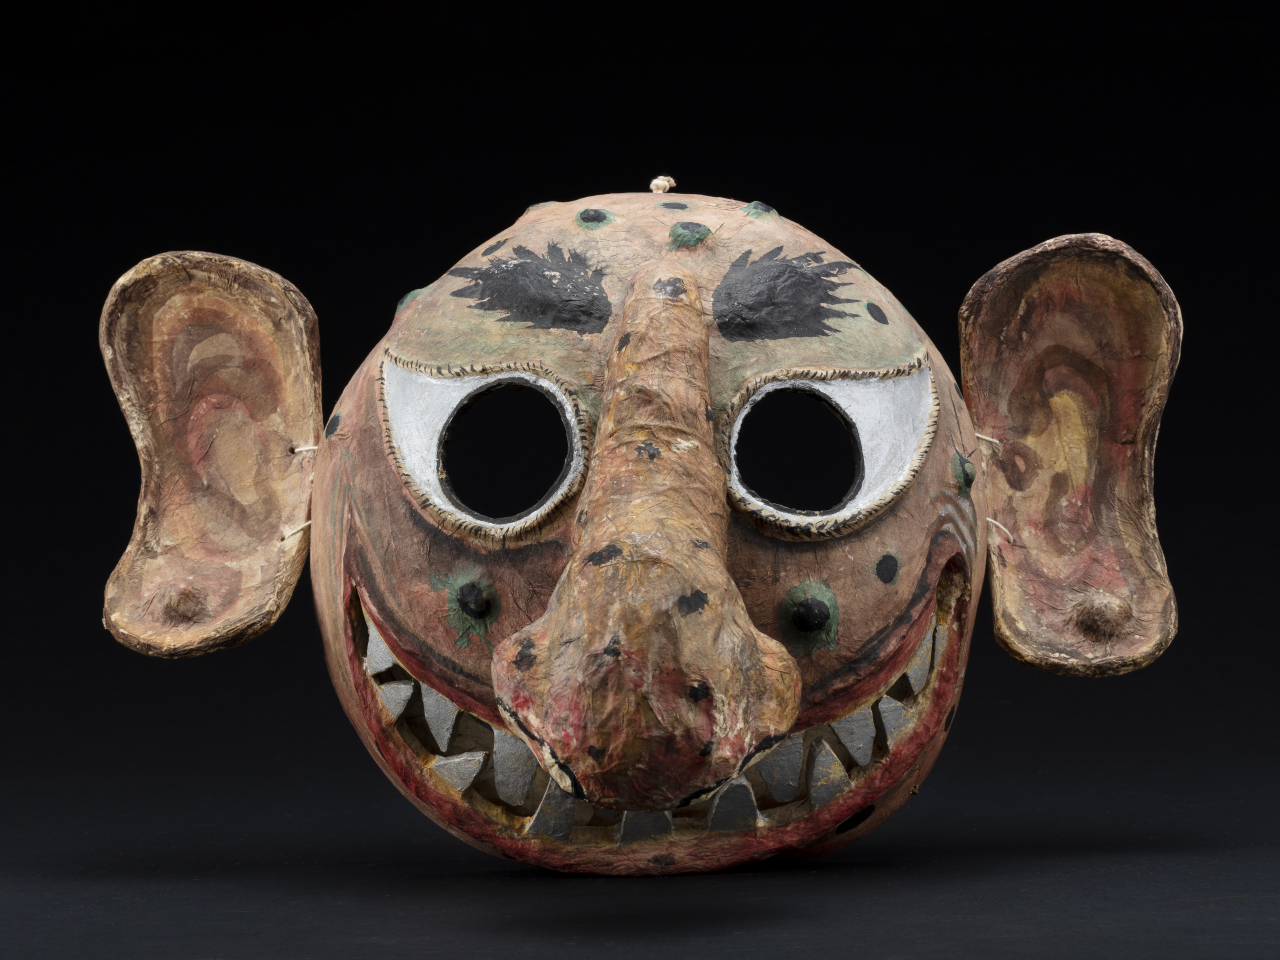 A malttugi mask from Korea, representing a servant character often featured in satirical performances originating from the early 20th century (NFMK)